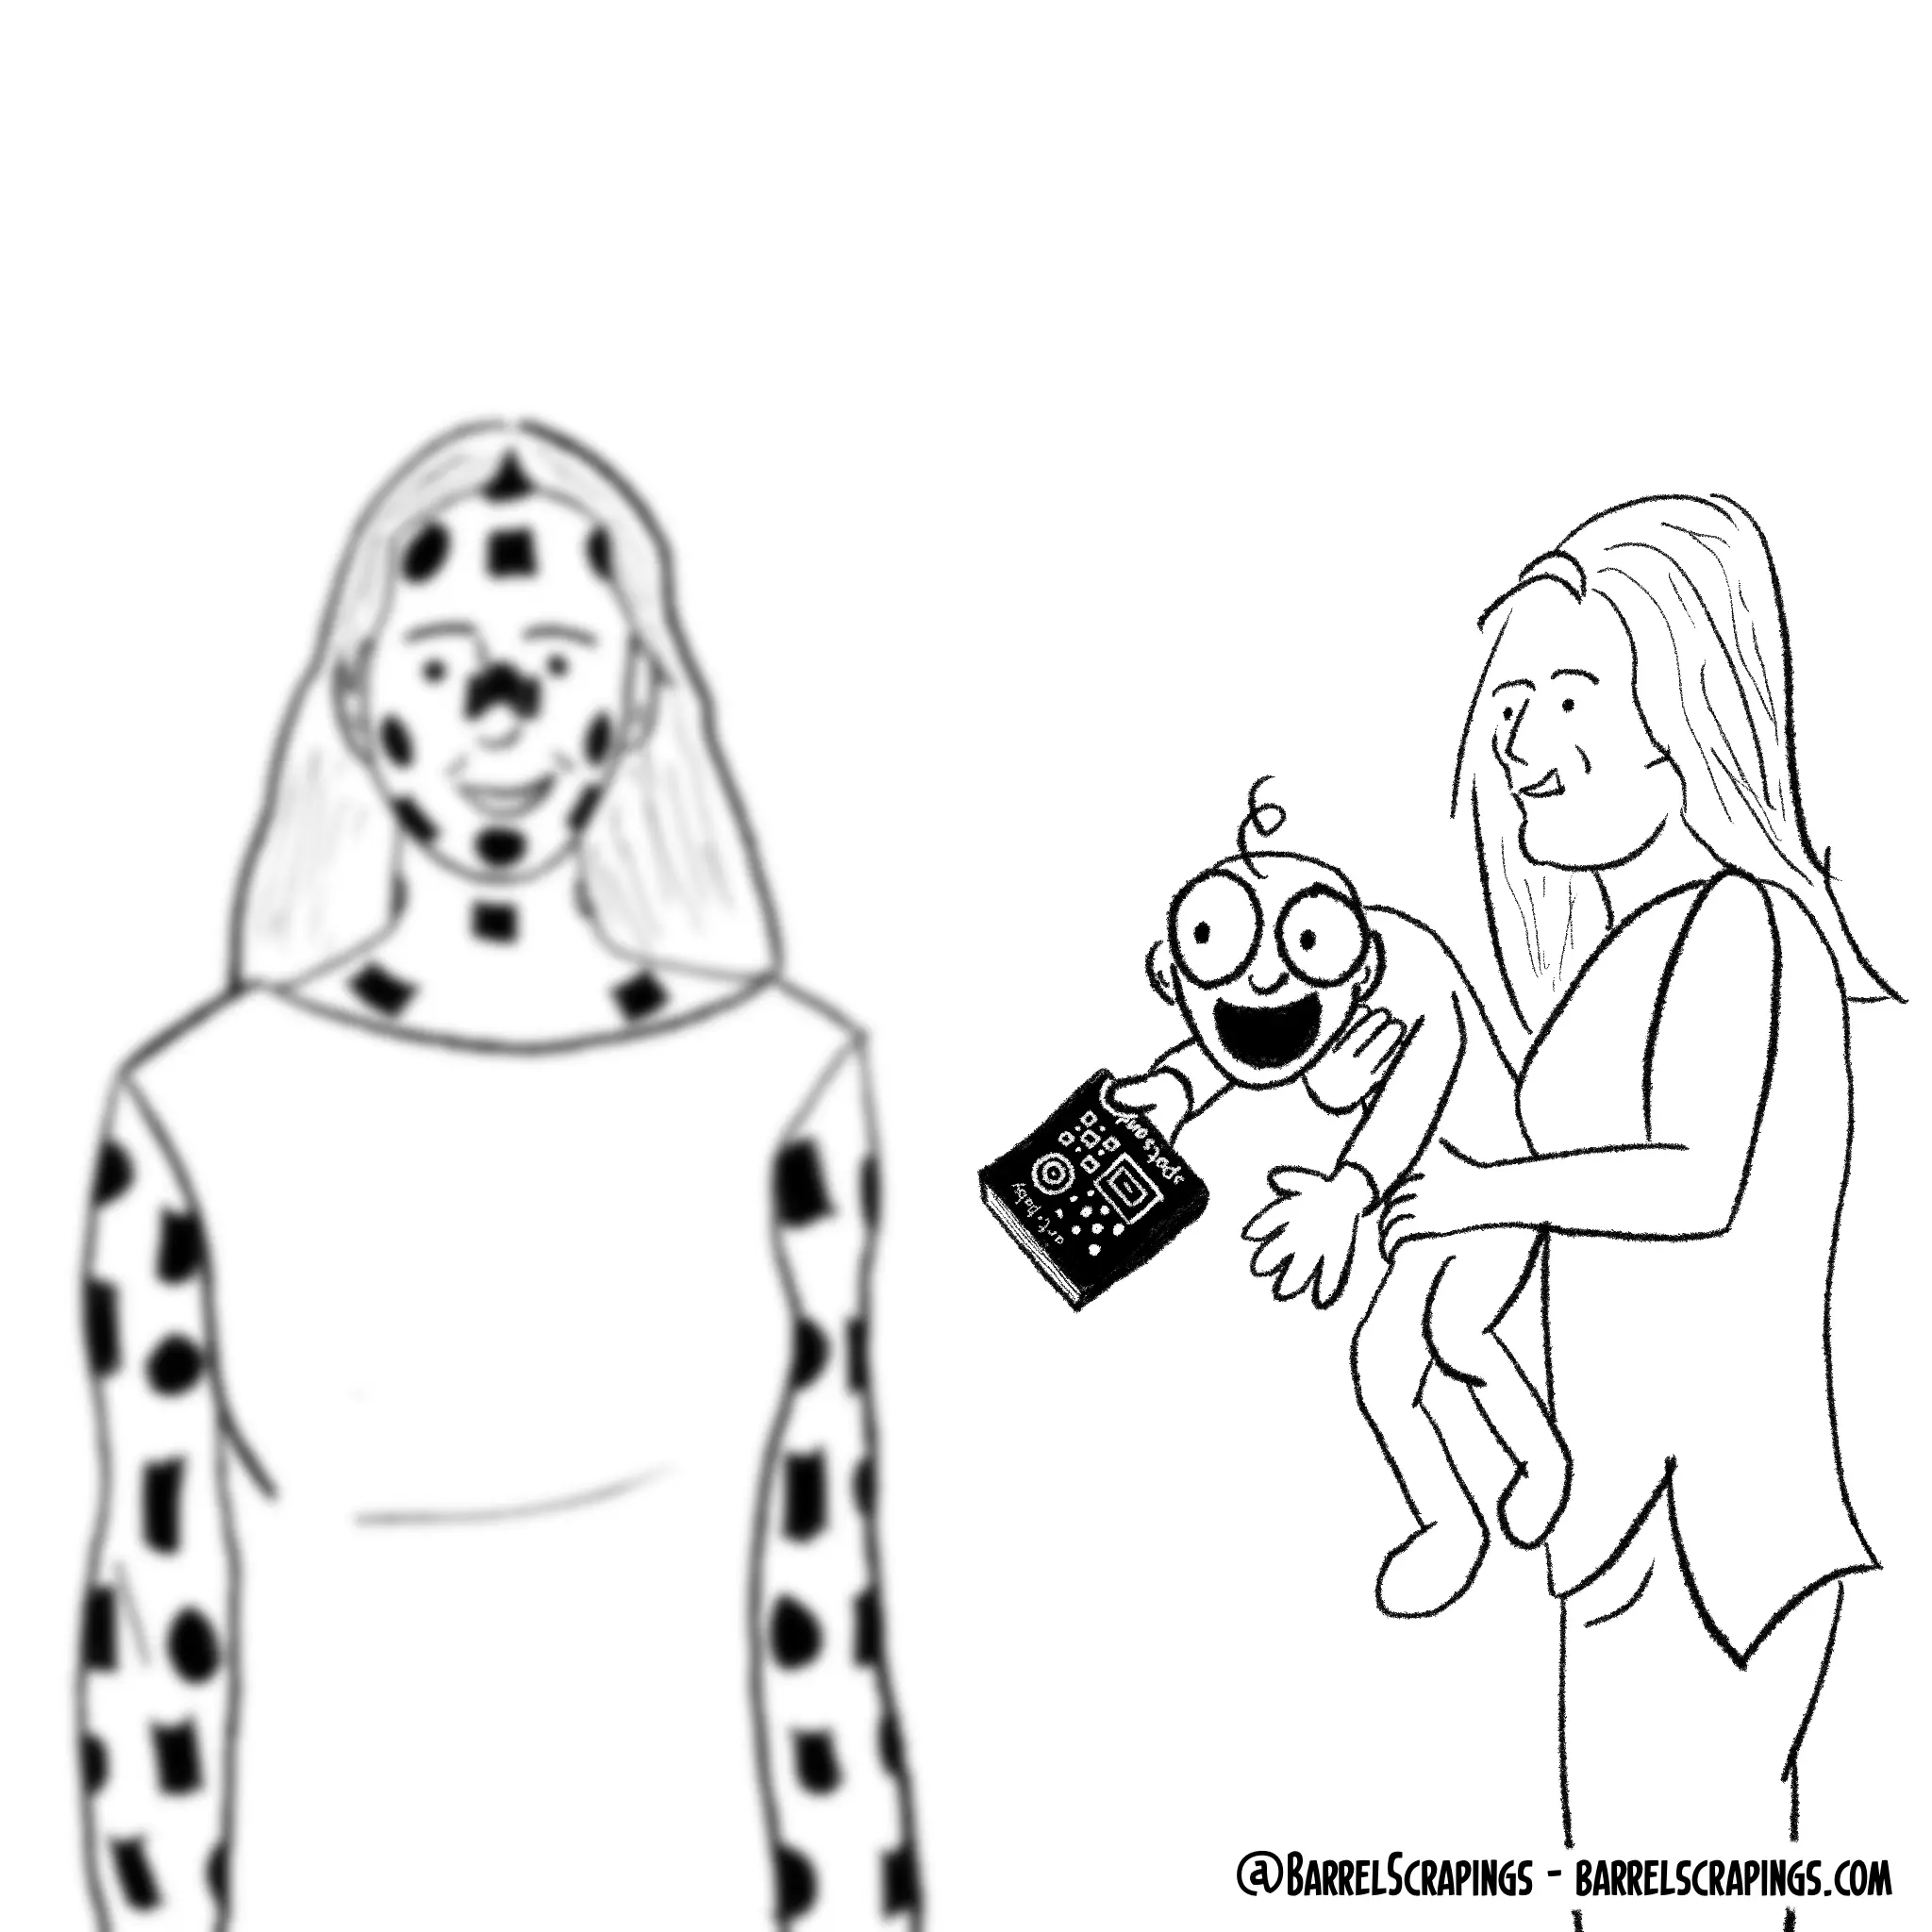 Distracted boyfriend meme, but the boyfriend is a baby who is super excited to see the woman in the foreground is covered in spots and dots. In his hand, you can see a copy of “Spots and Dots” book.